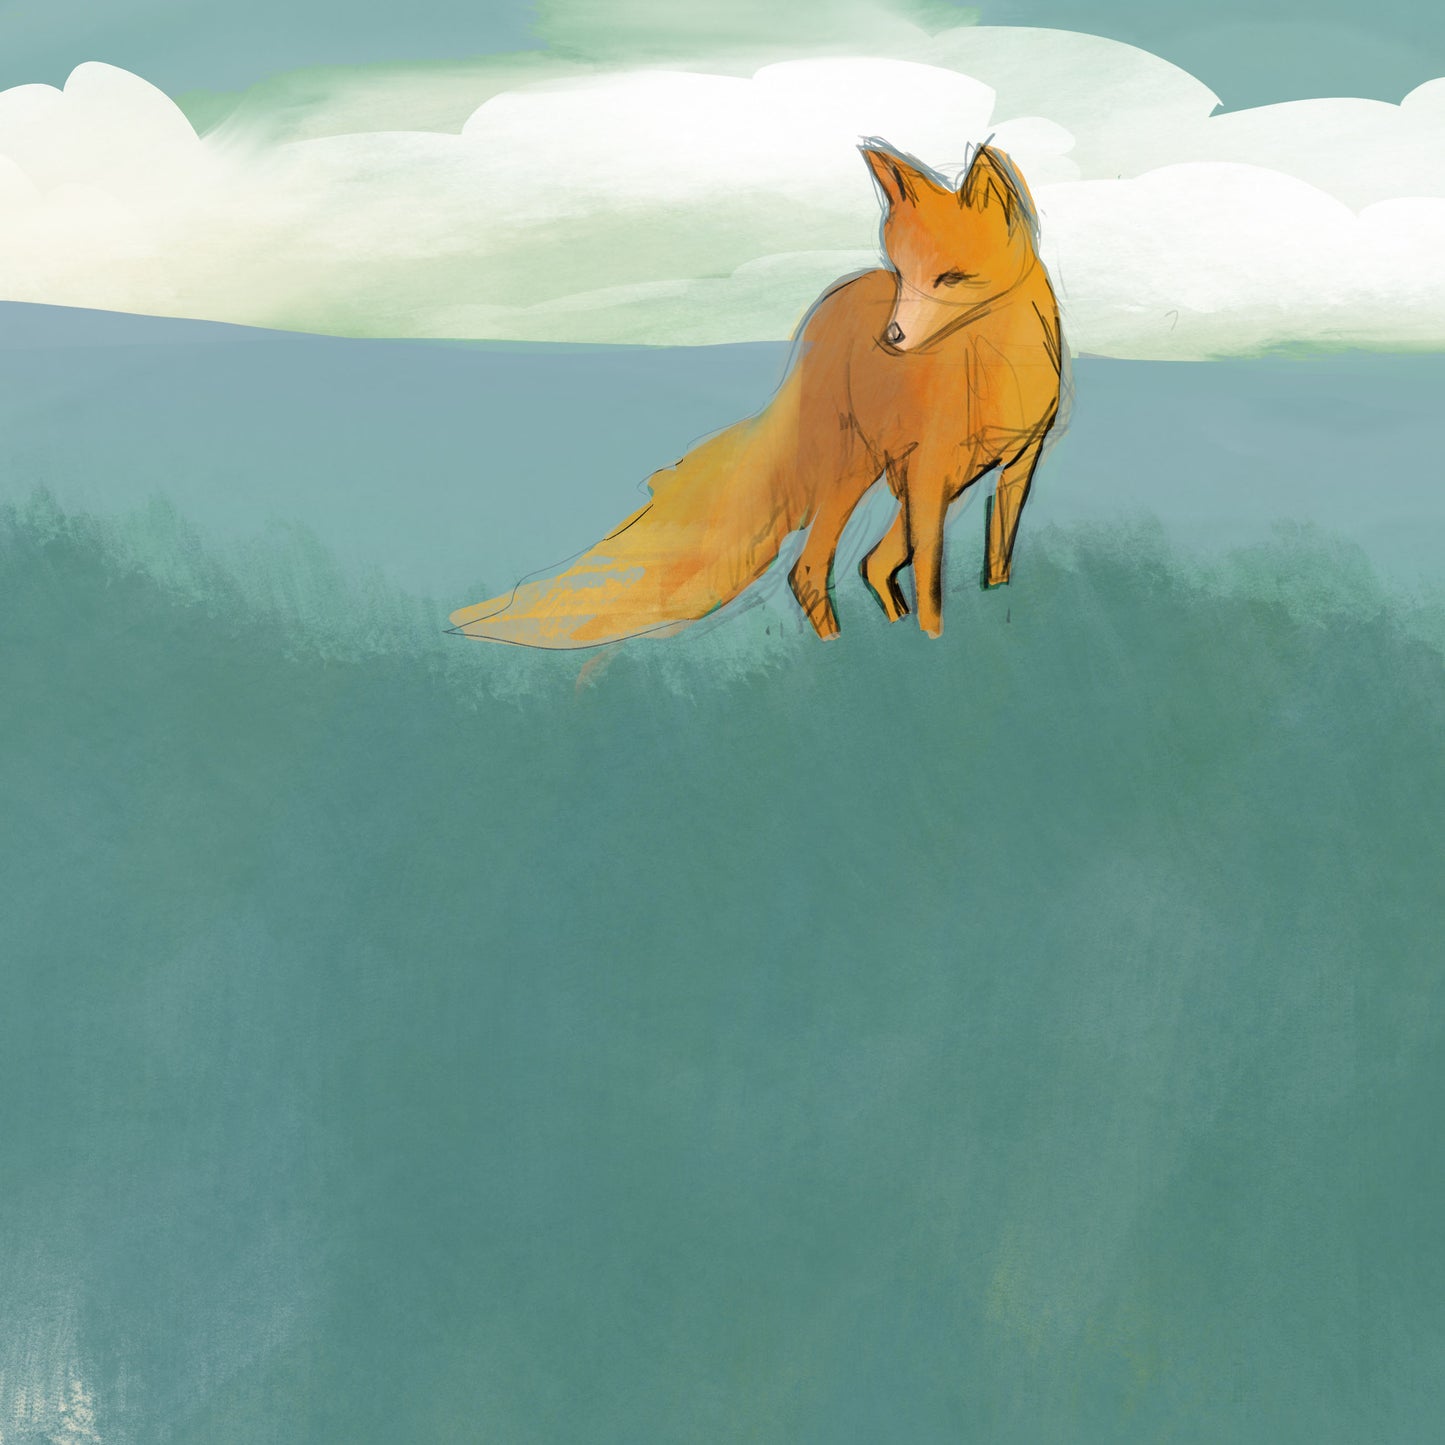 The fox at the western sea